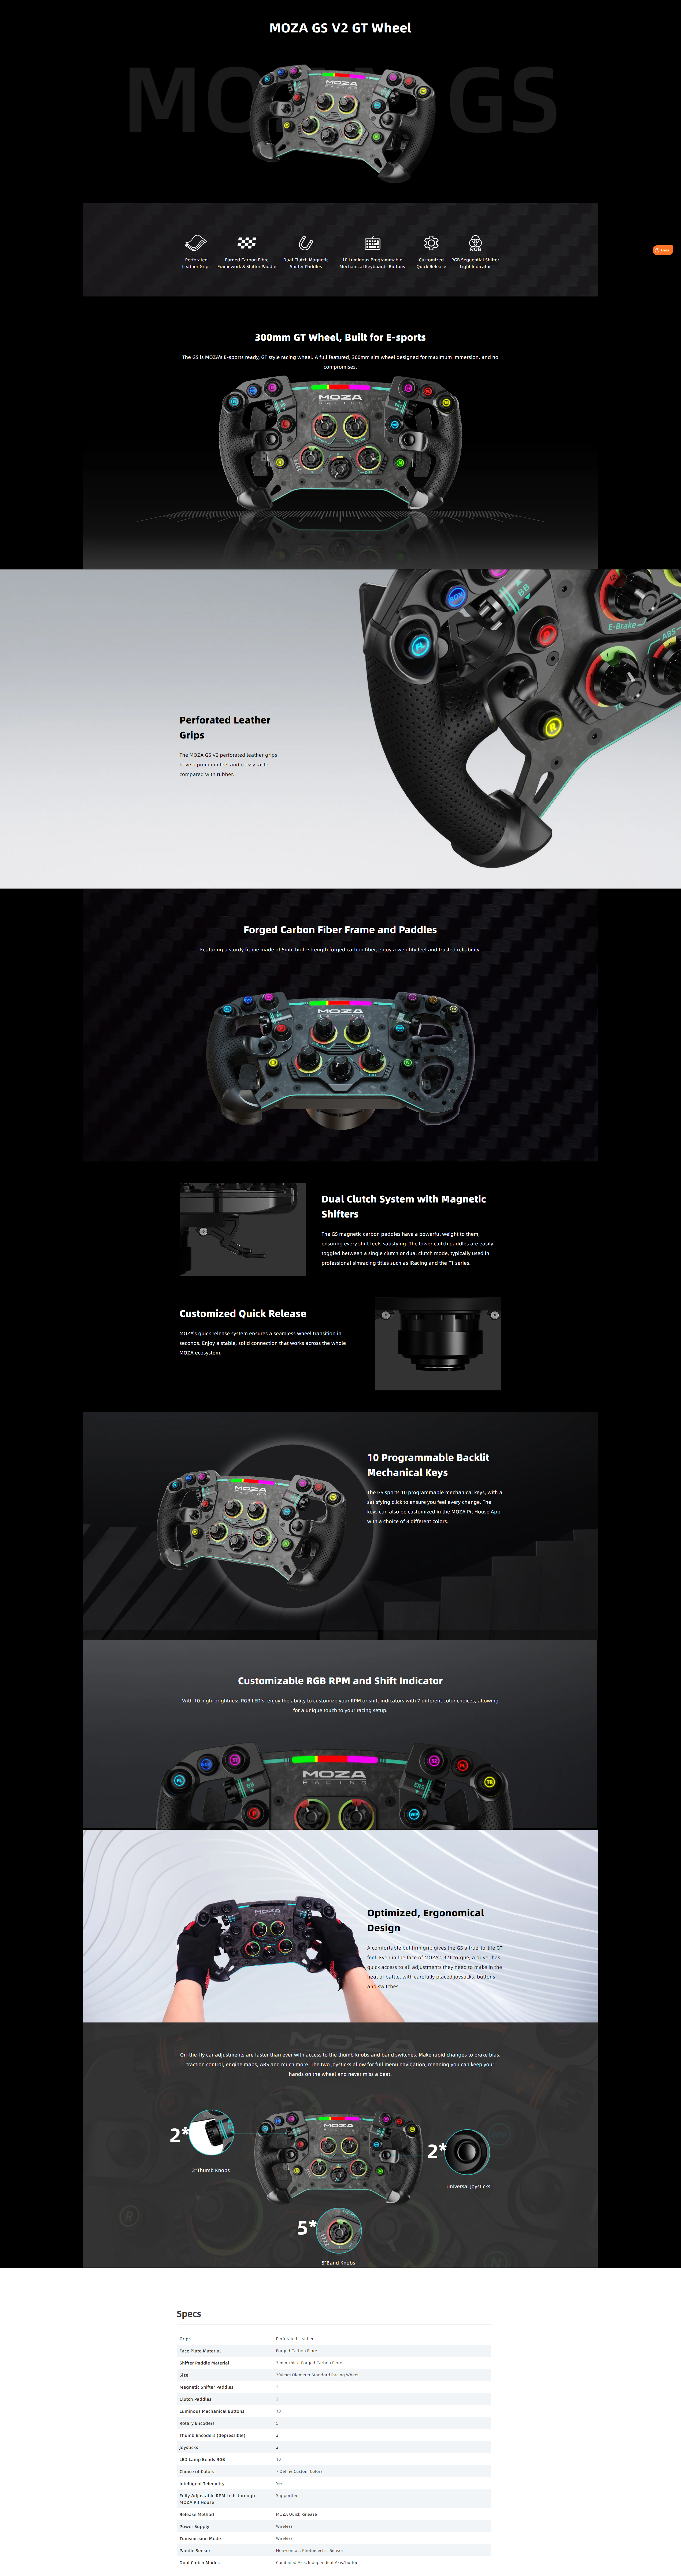 A large marketing image providing additional information about the product MOZA GS GT V2 Steering Wheel - Additional alt info not provided